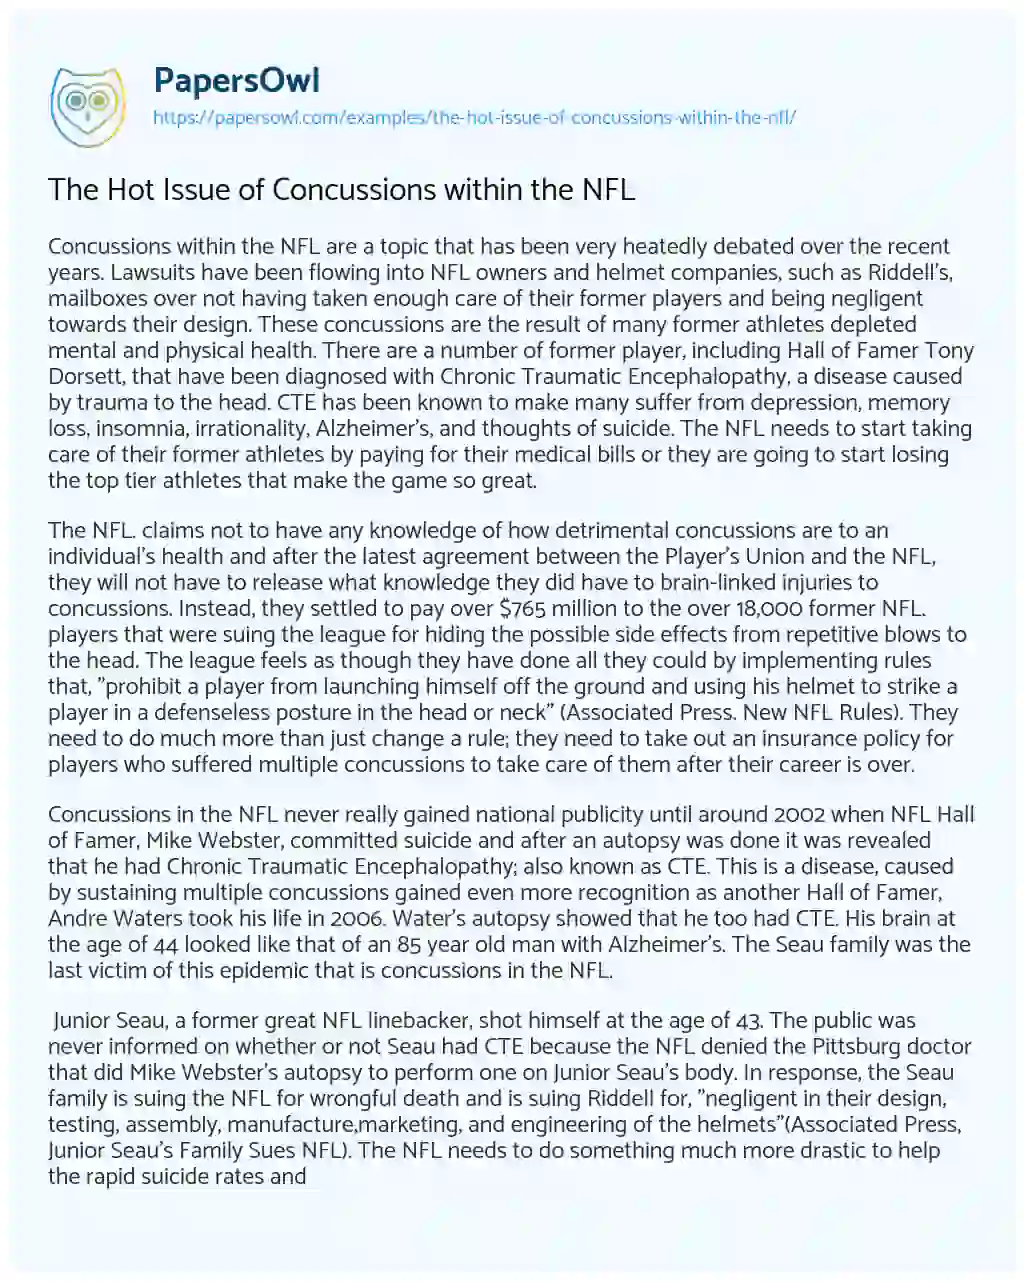 Essay on The Hot Issue of Concussions Within the NFL